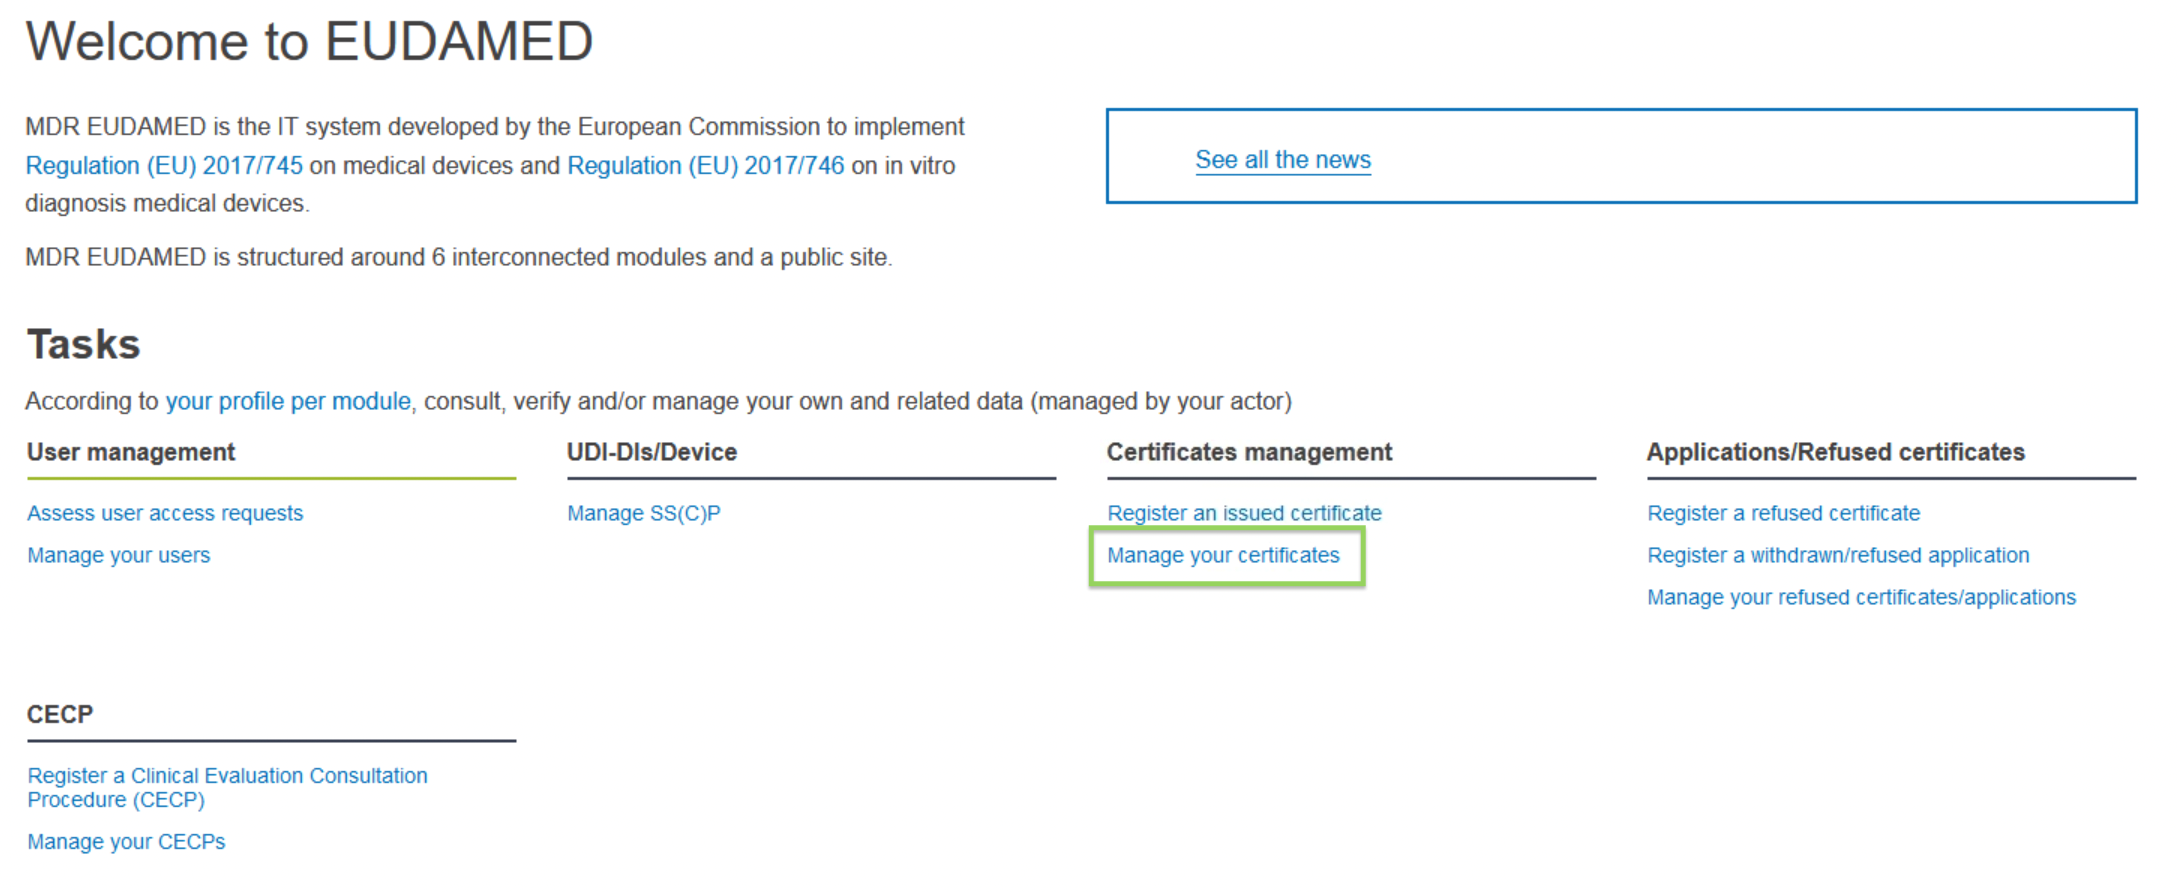 EUDAMED manage your certificates link on the dashboard